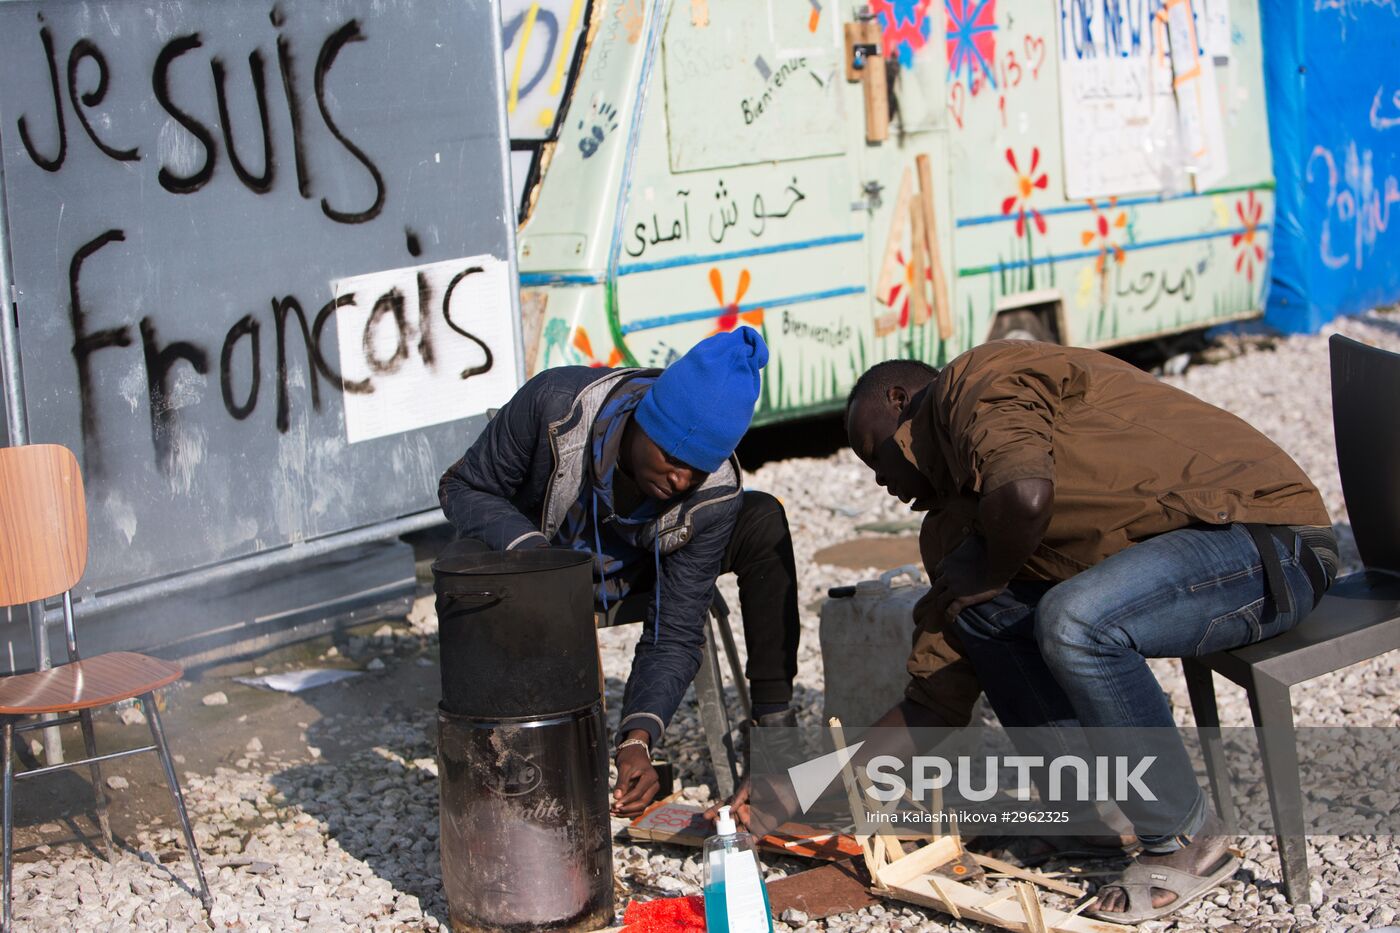 Update on refugee camp in Calais, France